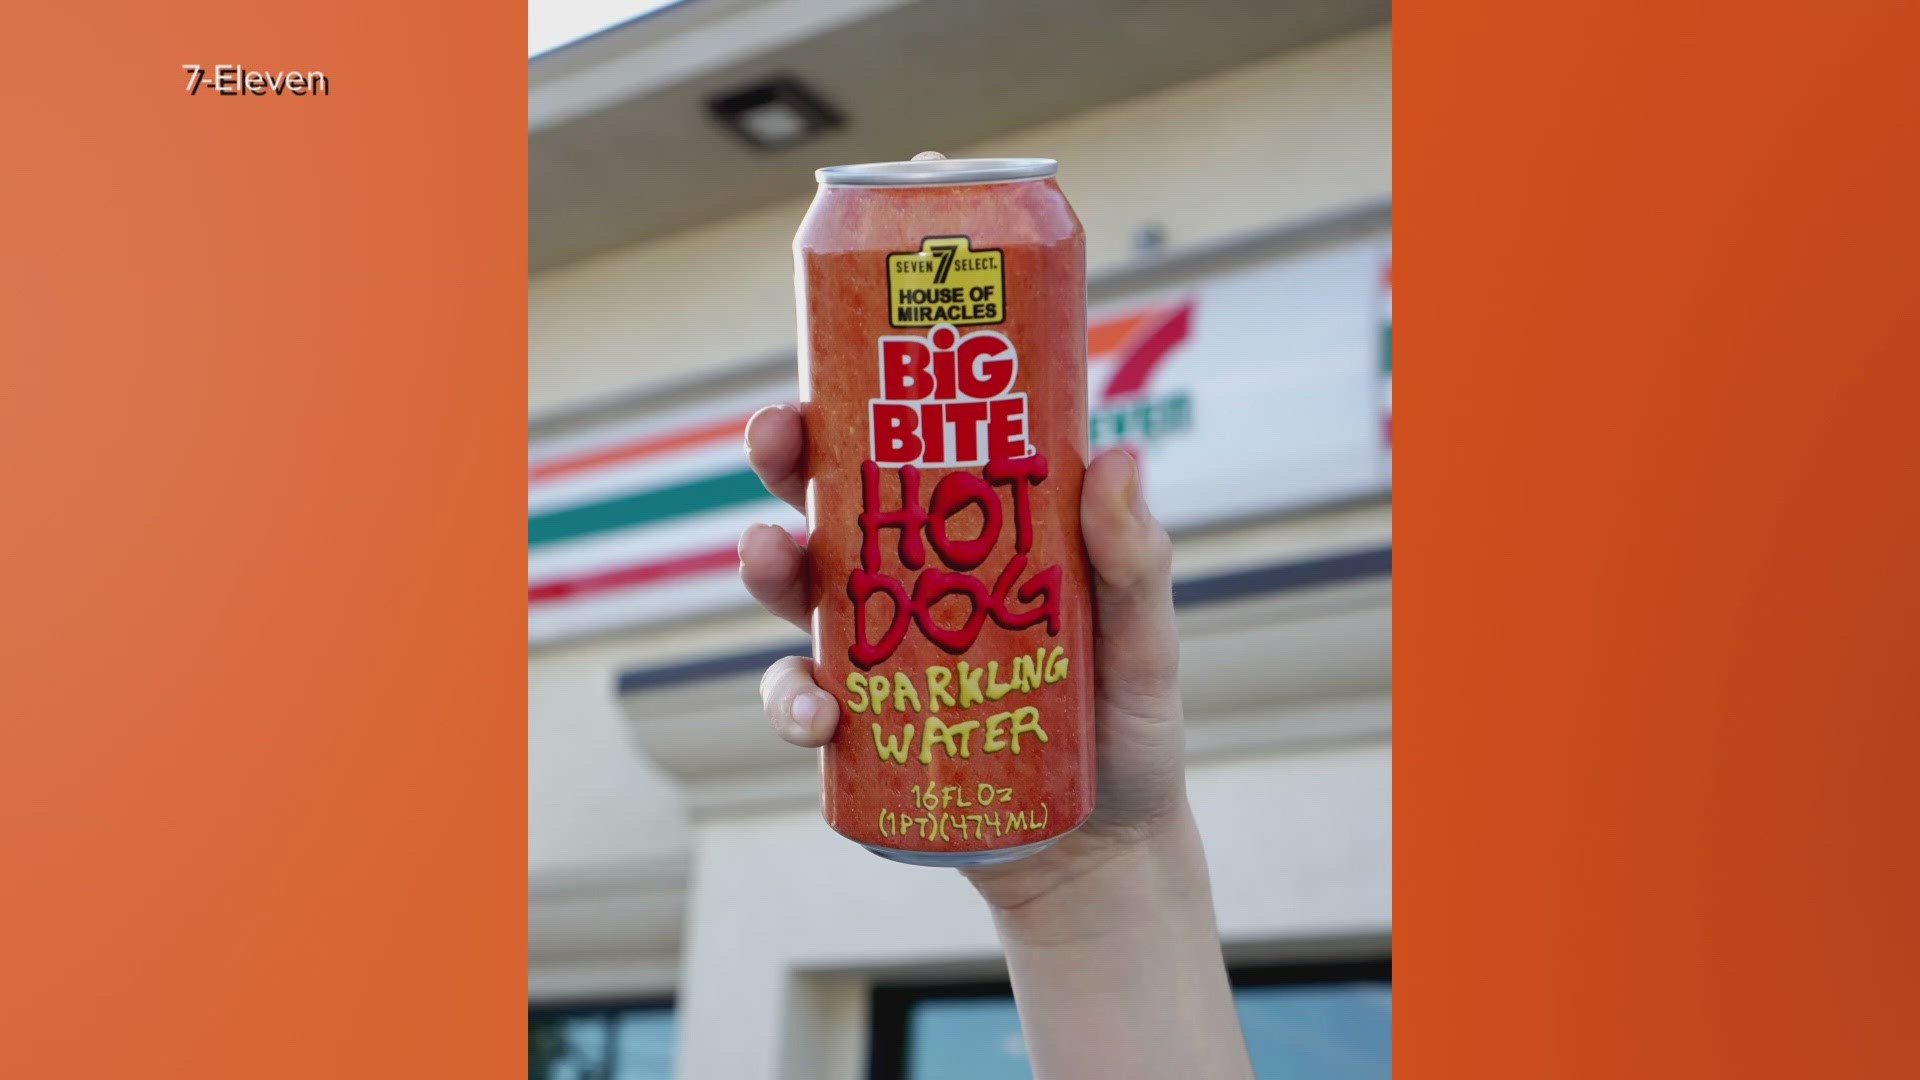 7-Eleven says it will release more details about the availability of a hot dog-flavored sparkling water April 1 ... but a new lineup of other flavors is available.